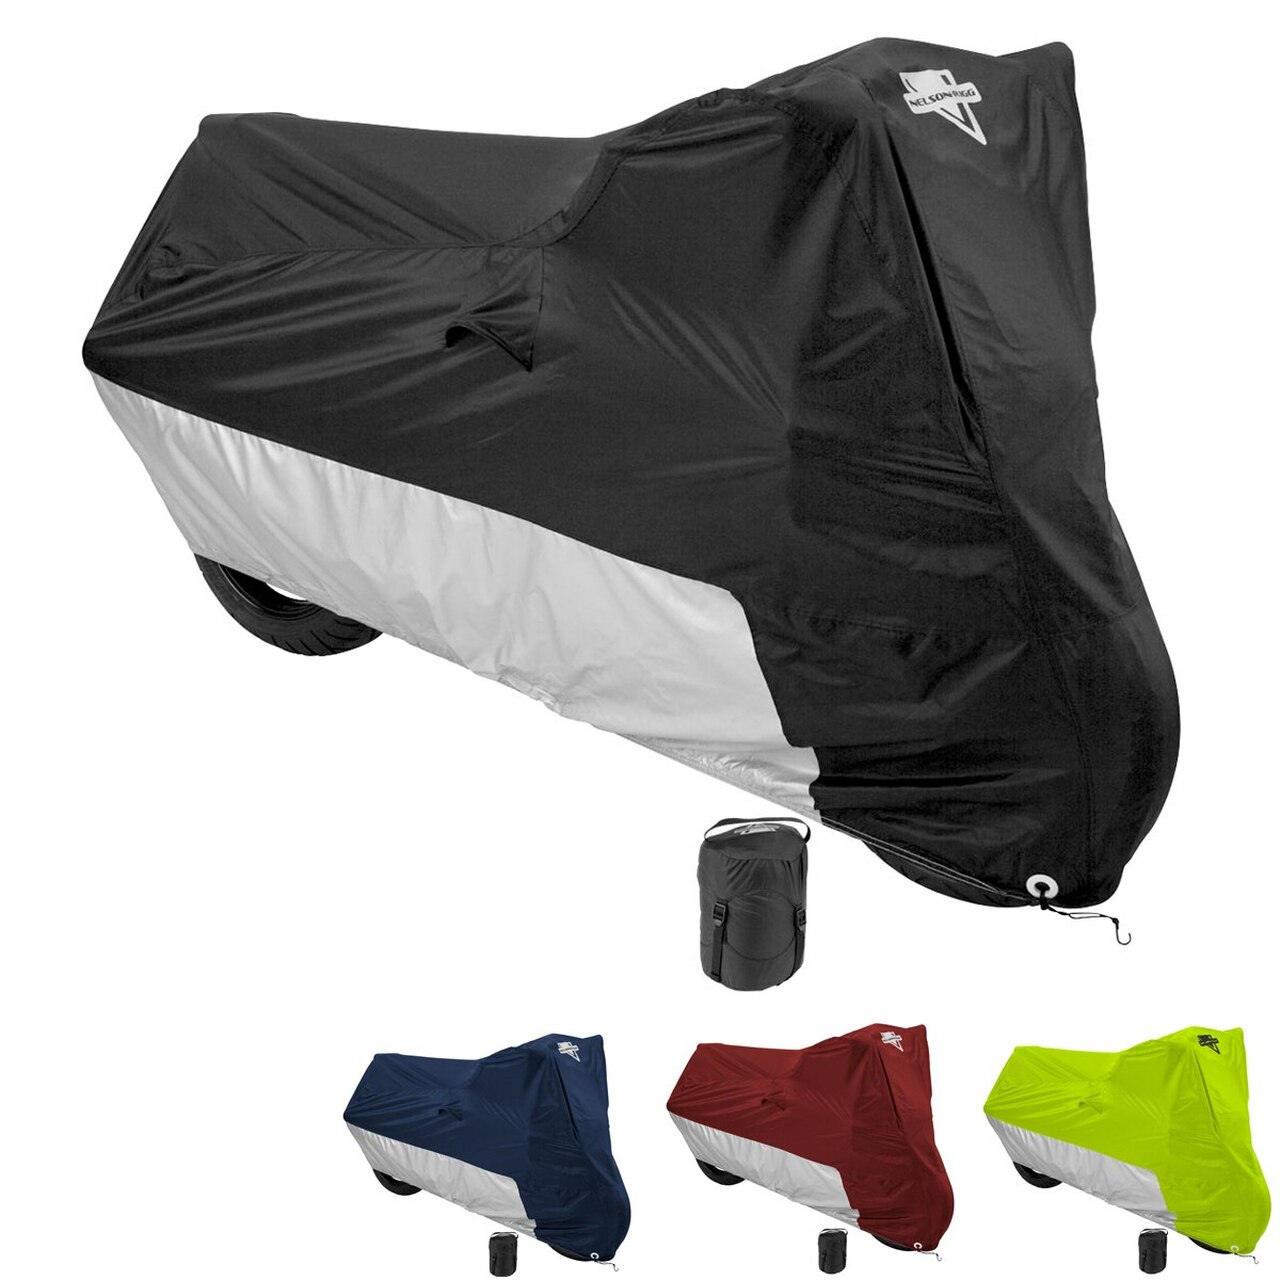 Nelson Rigg Deluxe All Season Motorcycle Covers - Team Motorcycle